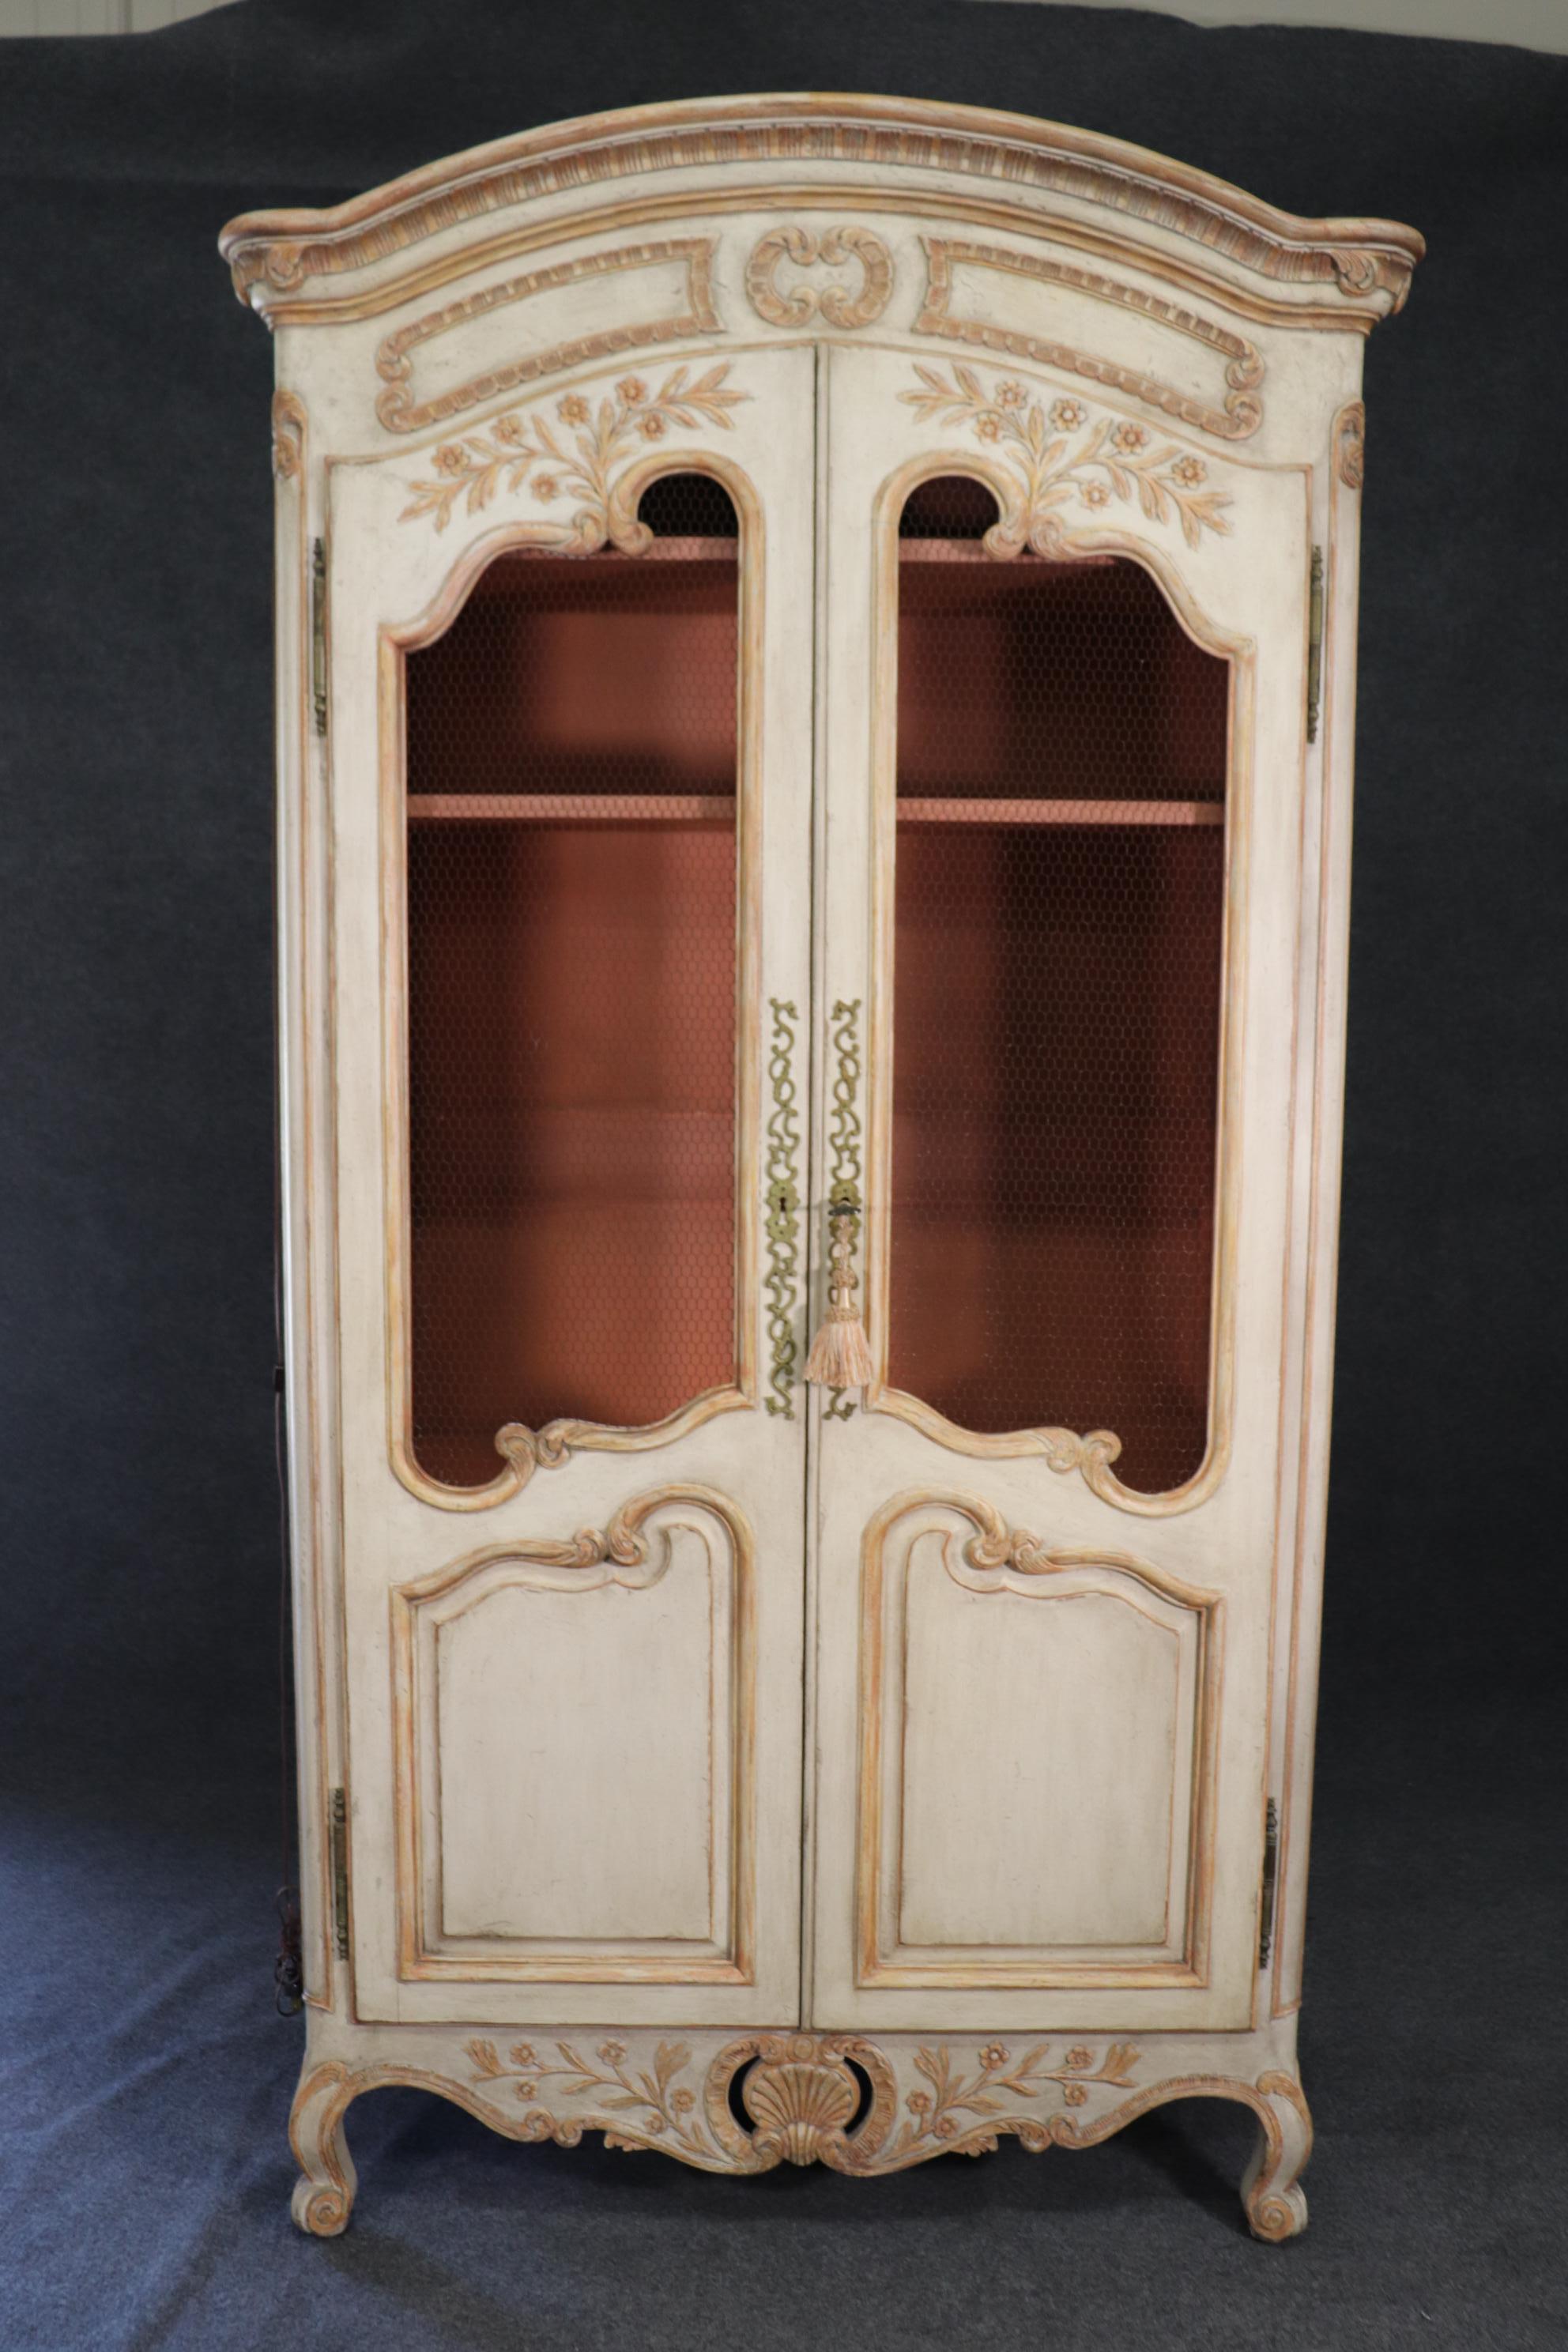 This is a charming piece with an equally charming color combination. The armoire is fitted with drapery hangers for hanging rapes inside the mesh doors. The interior color is a pinkish-coral. It is currently lighted. Measures 90 tall x 44 wide x 20